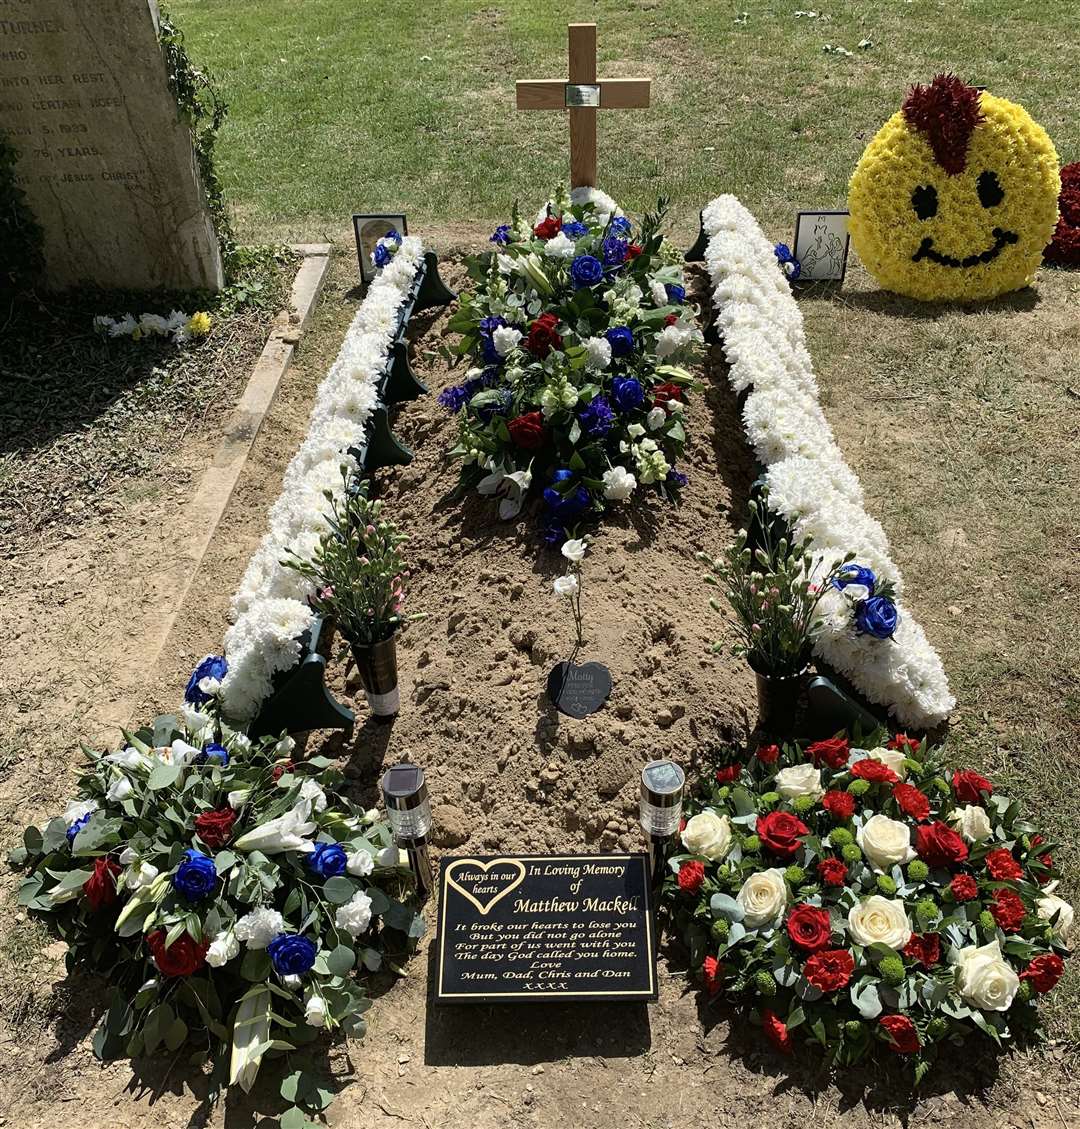 Matthew was laid to rest at the Kent and Sussex Crematorium